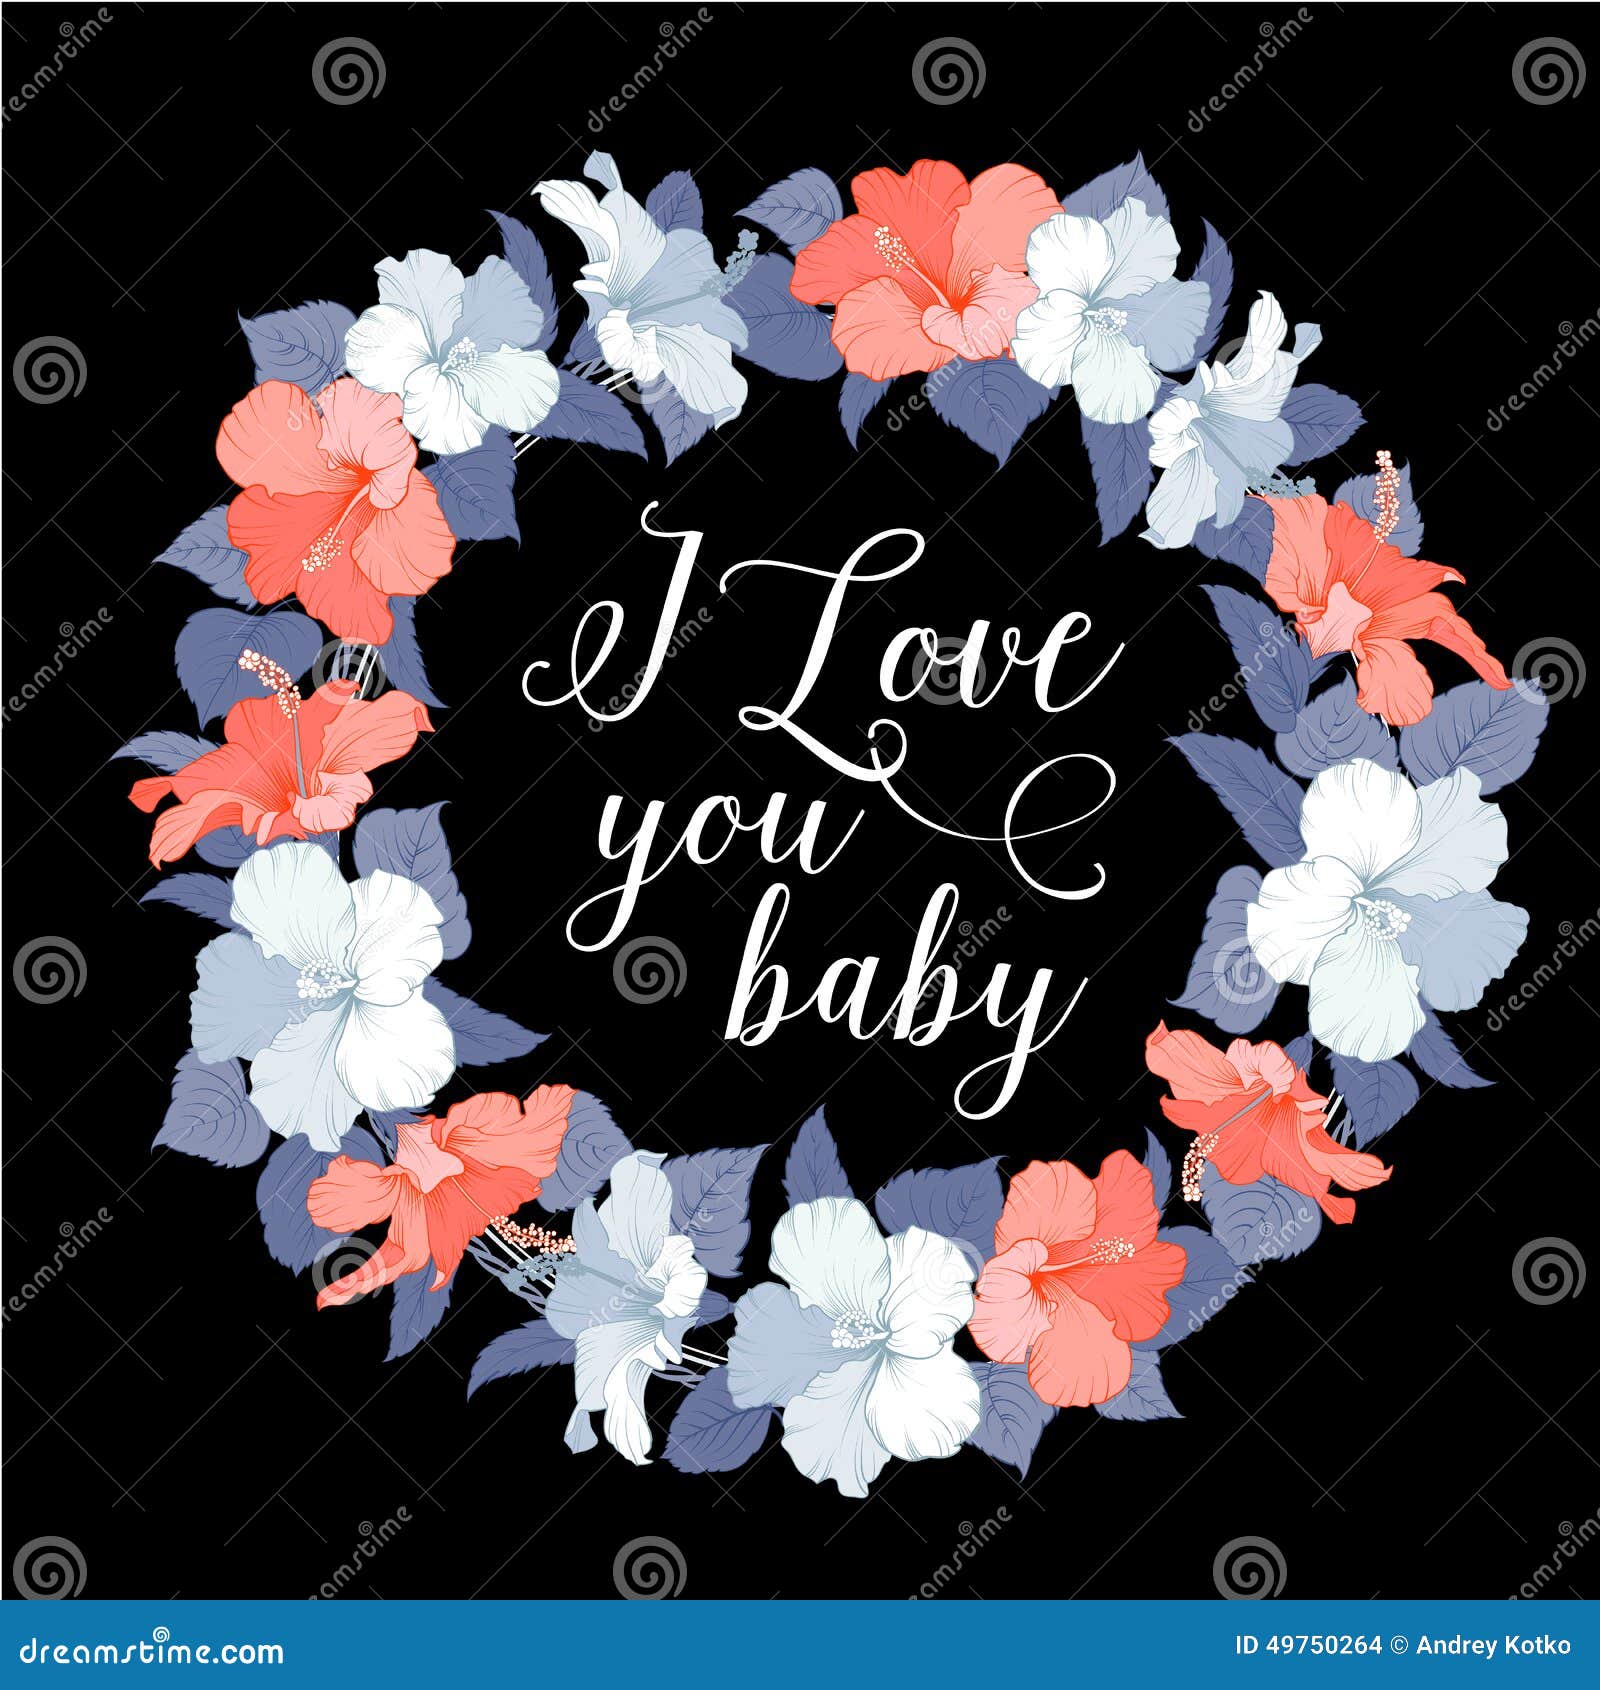 L Love You Baby Free Vector N Clip Art